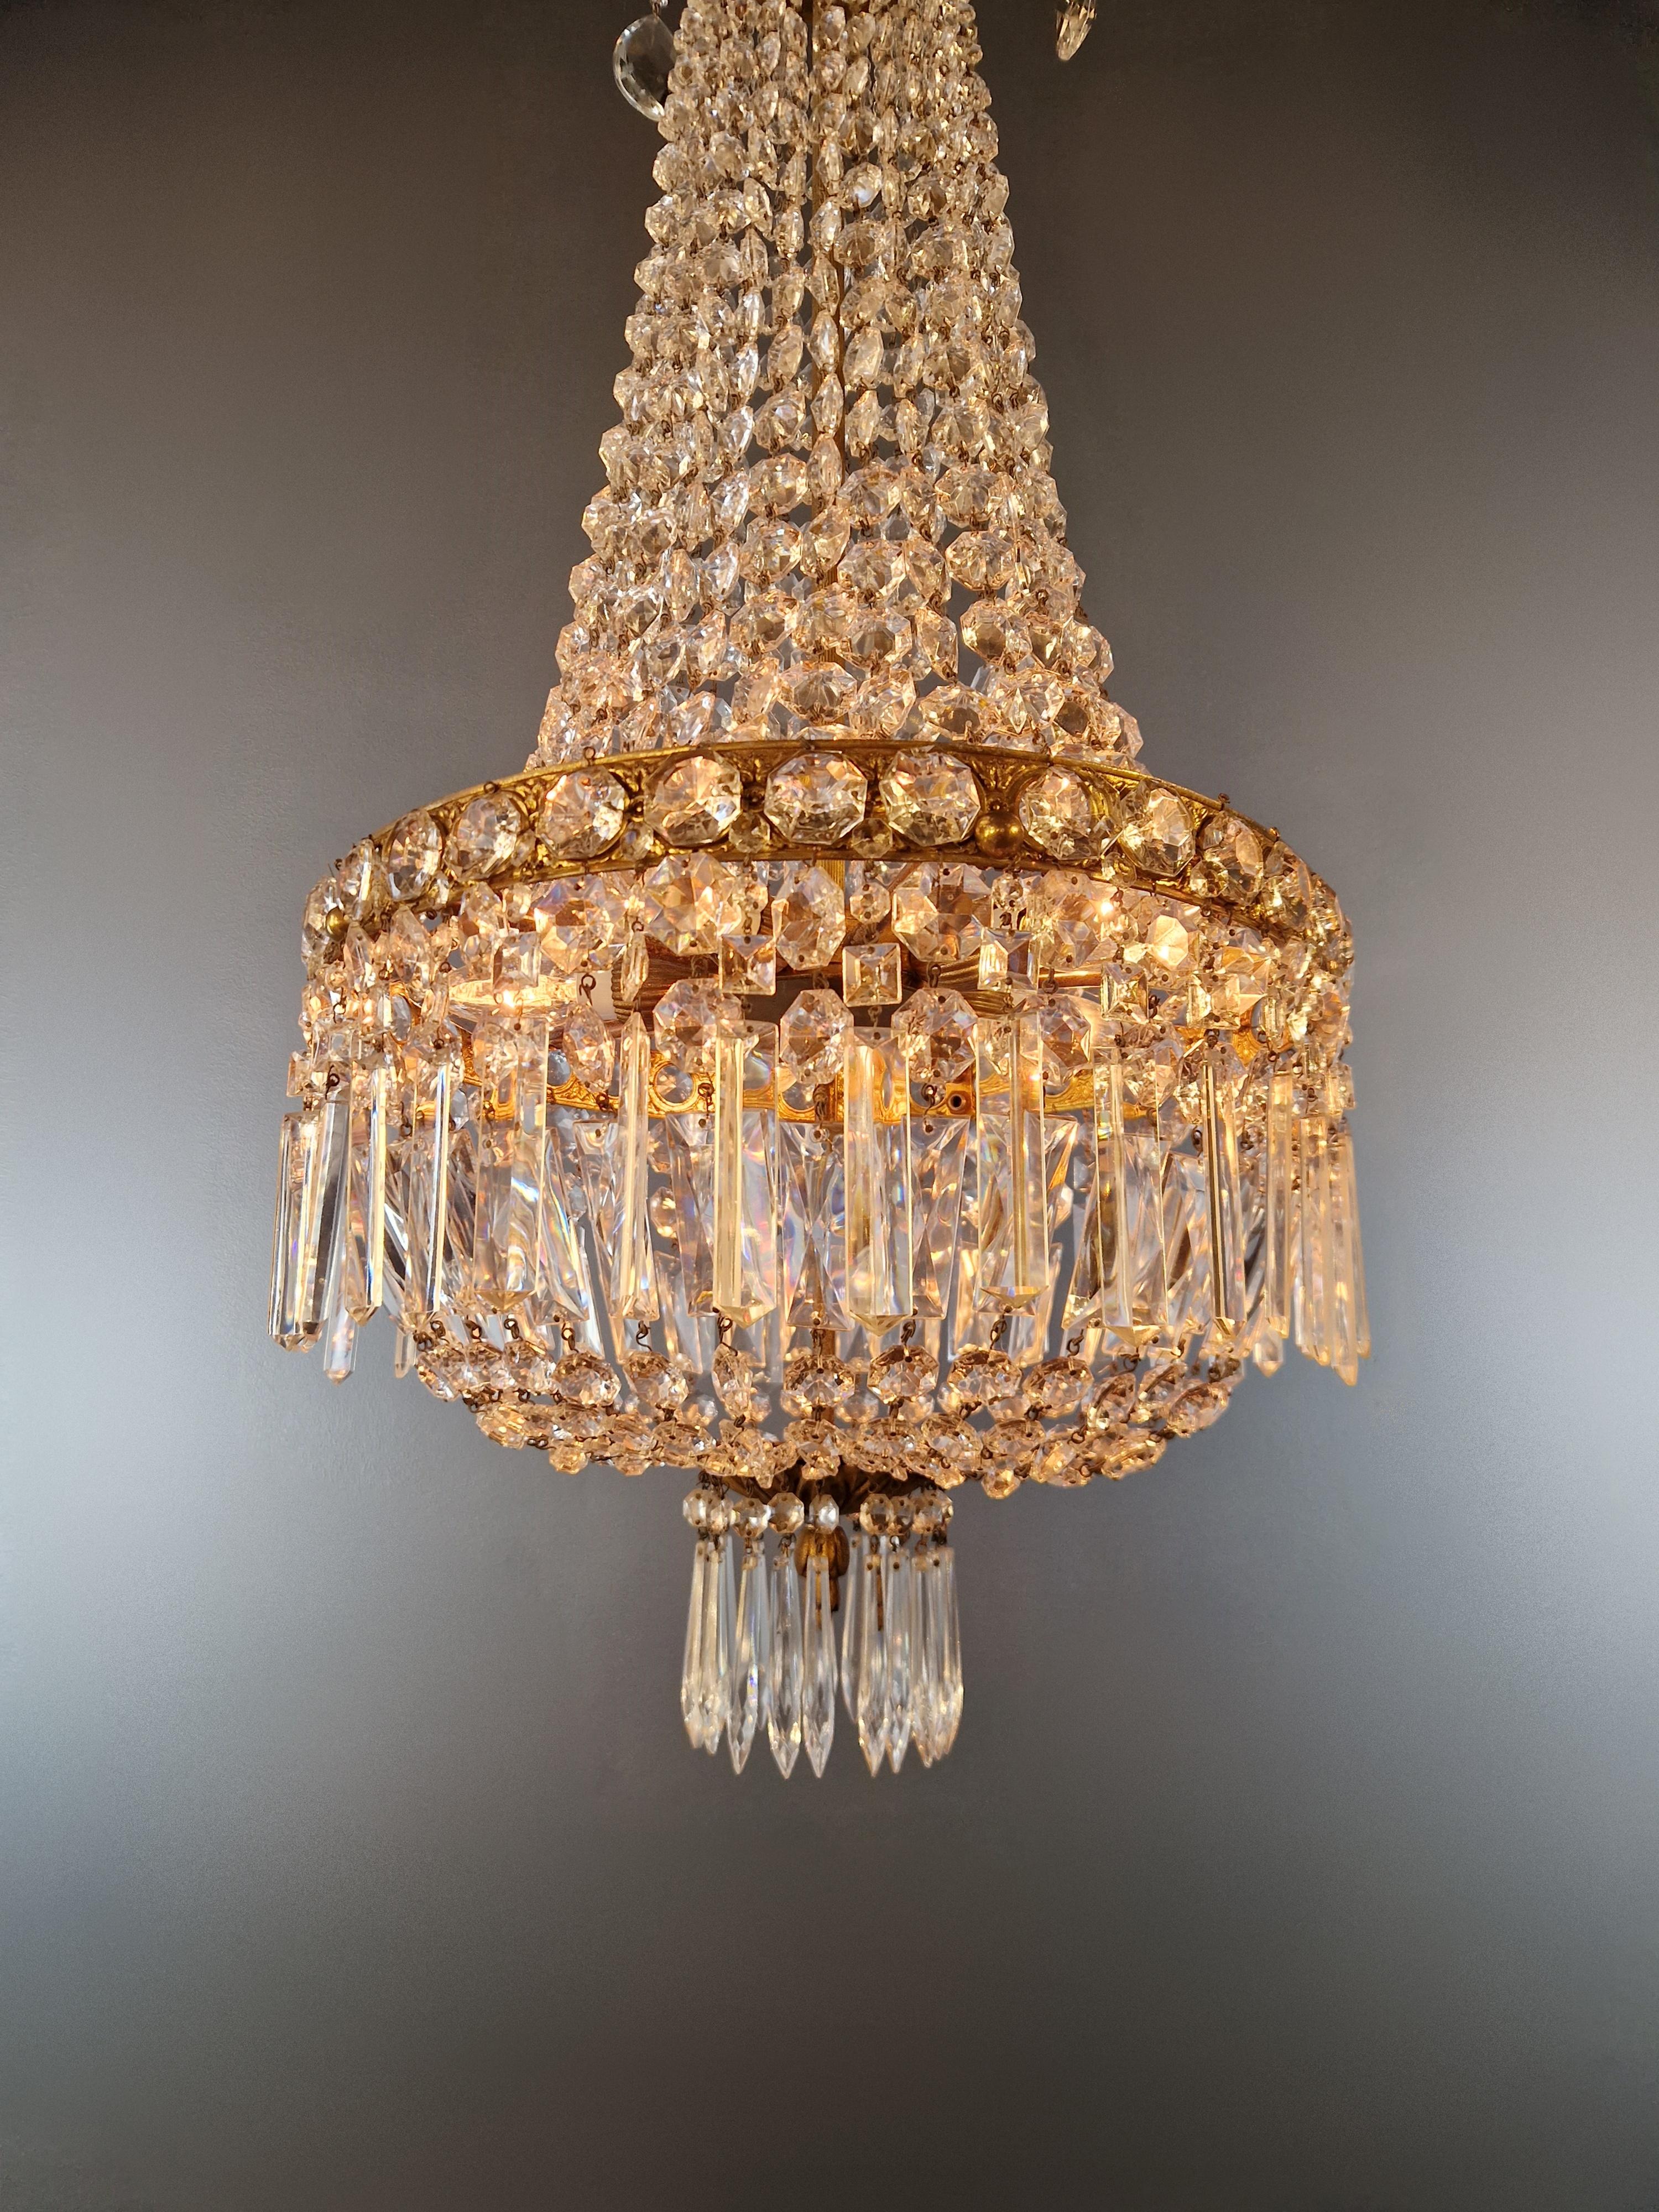 Early 20th Century Fine Brass Empire Sac a Pearl Chandelier Crystal Lustre Basket Lamp Antique For Sale